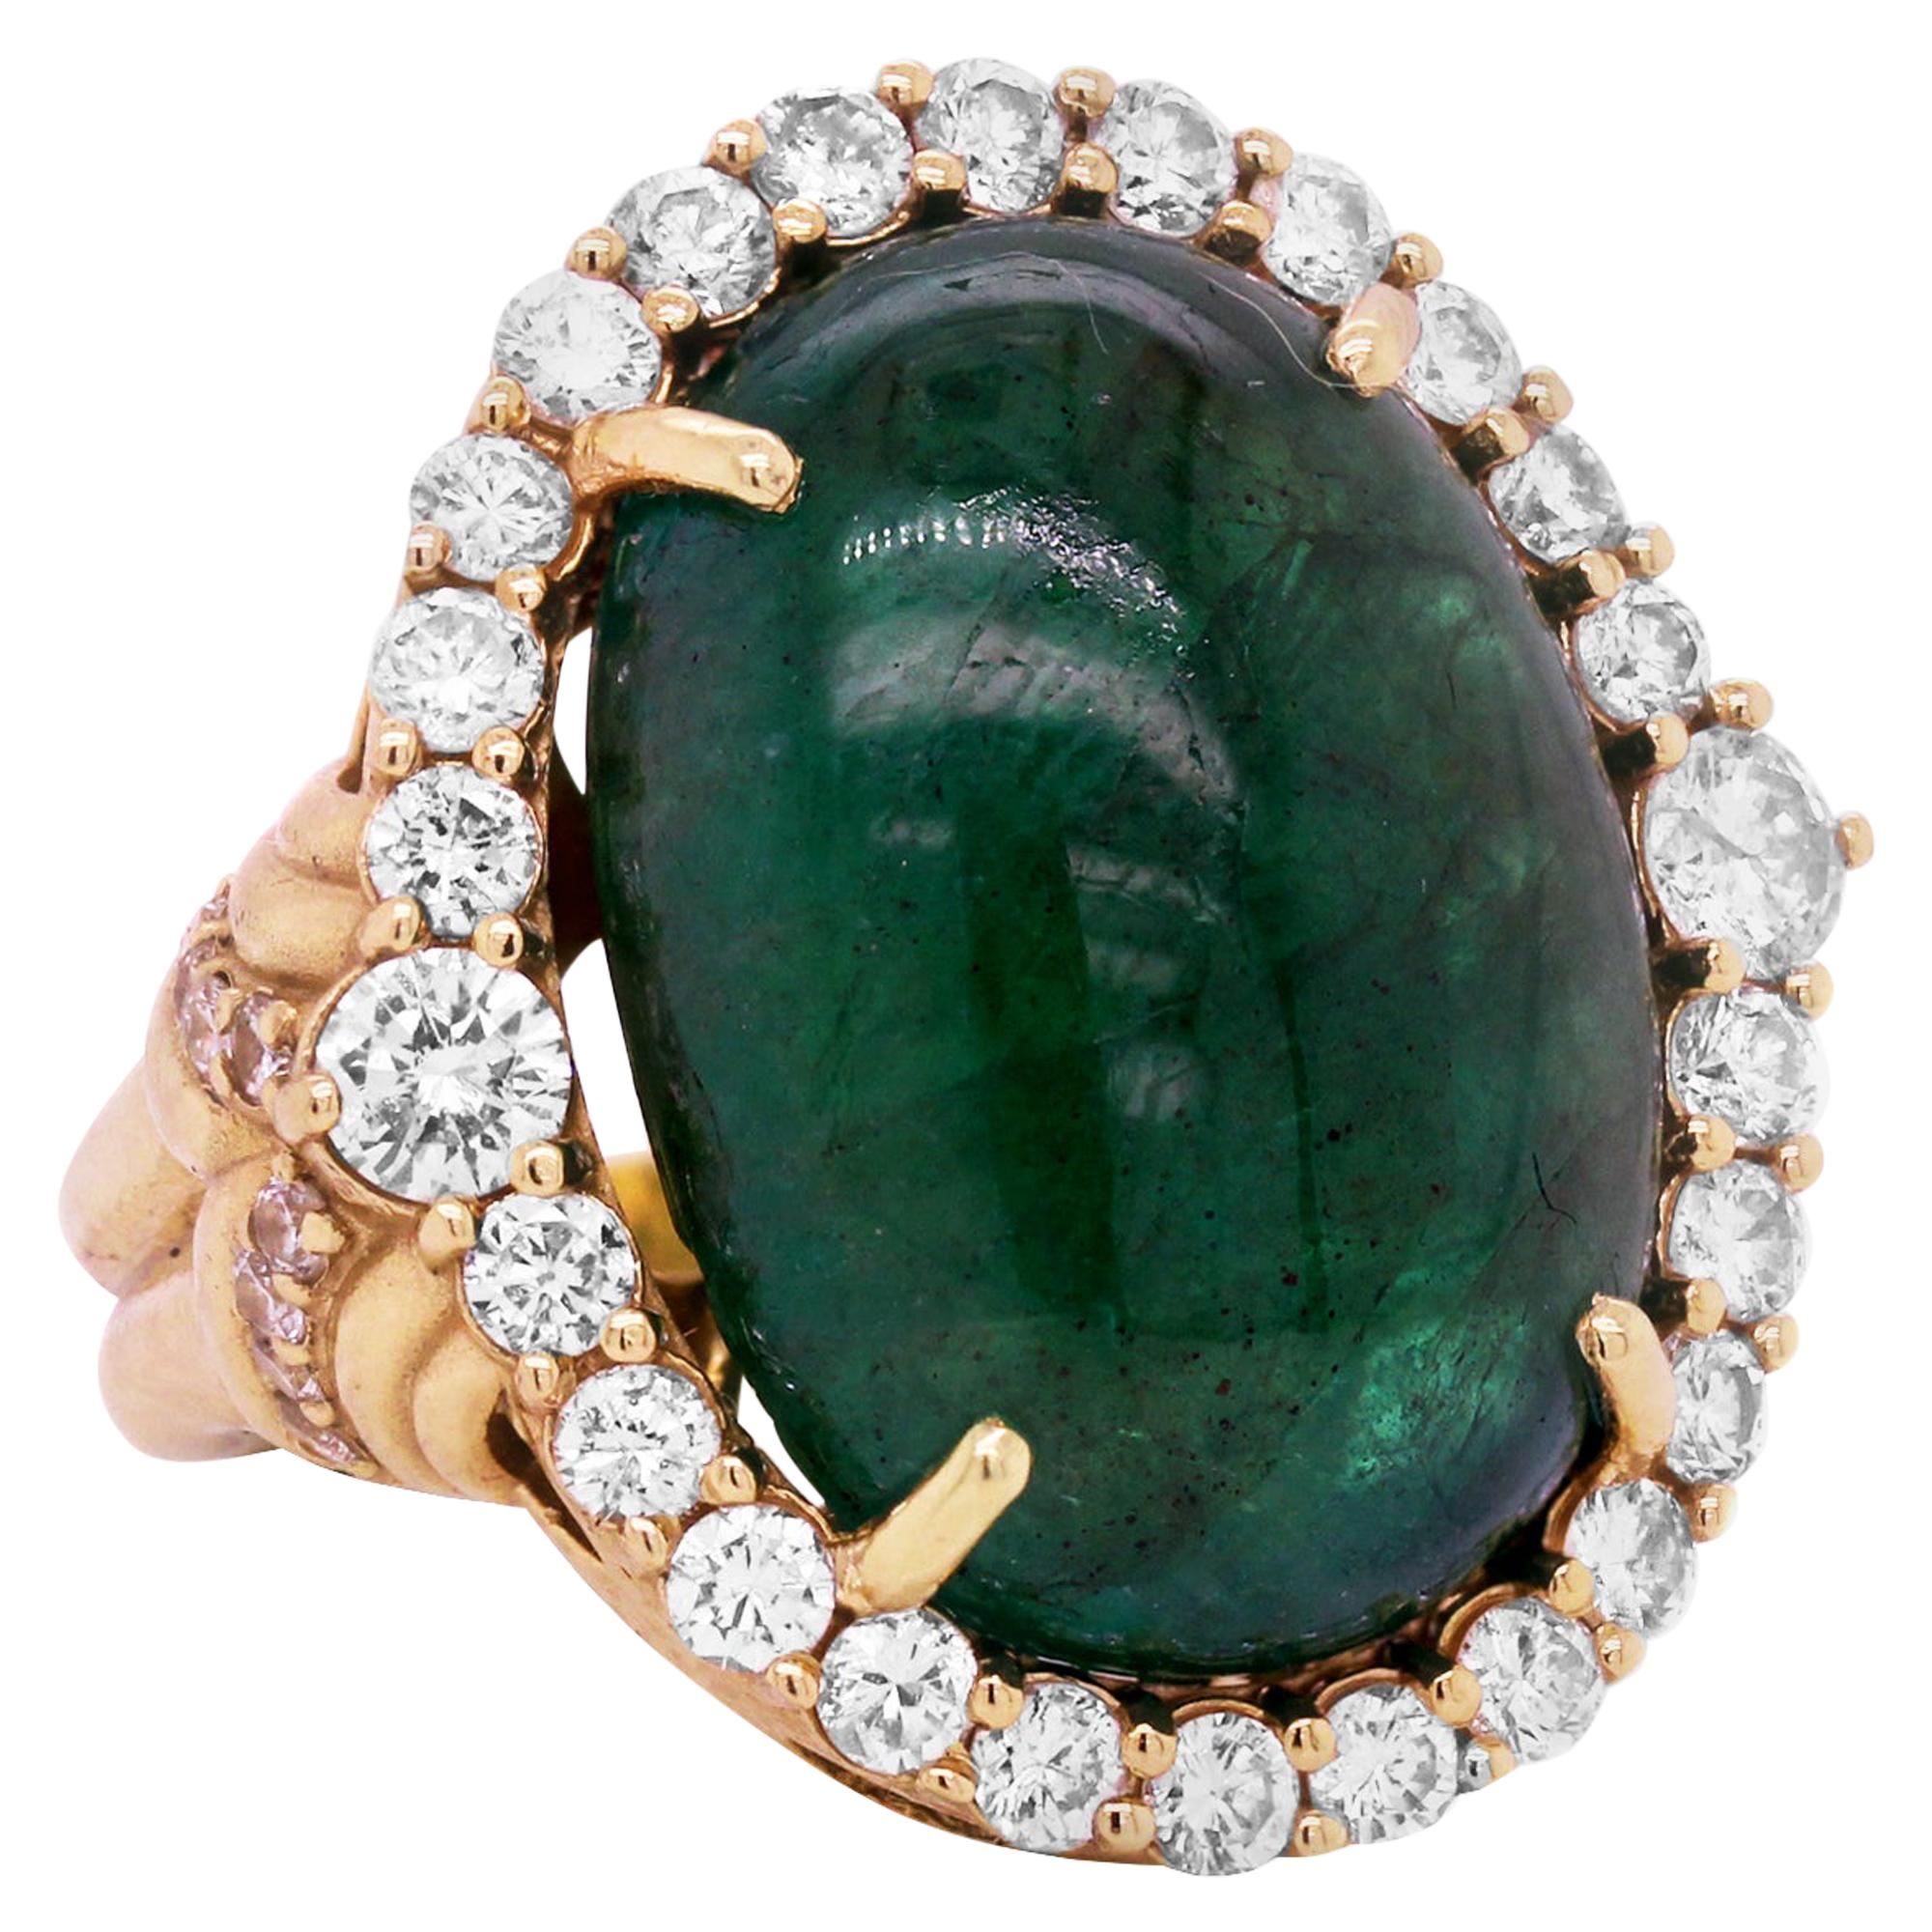 33 Carat Cabochon Oval Colombian Emerald 18K Yellow Gold Diamond Cocktail Ring